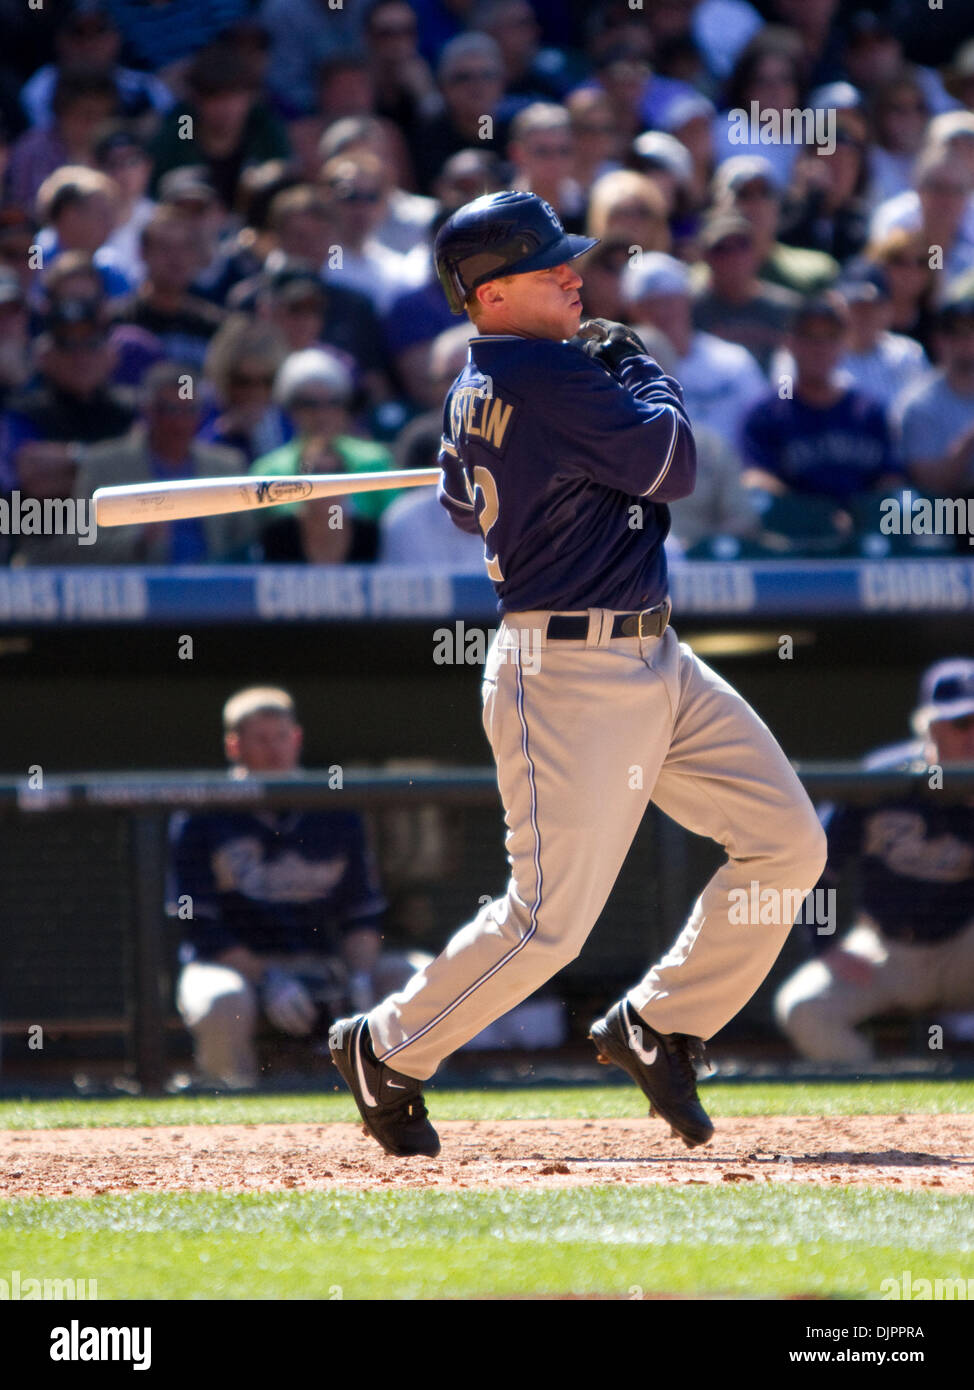 Apr 9, 2010 - Denver, Colorado, USA - San Diego Padres second baseman DAVID ECKSTEIN hits during a 7-0 loss to the Colorado Rockies on Opening Day at Coors Field. (Credit Image: © Don Senia Murray/ZUMA Press) Stock Photo